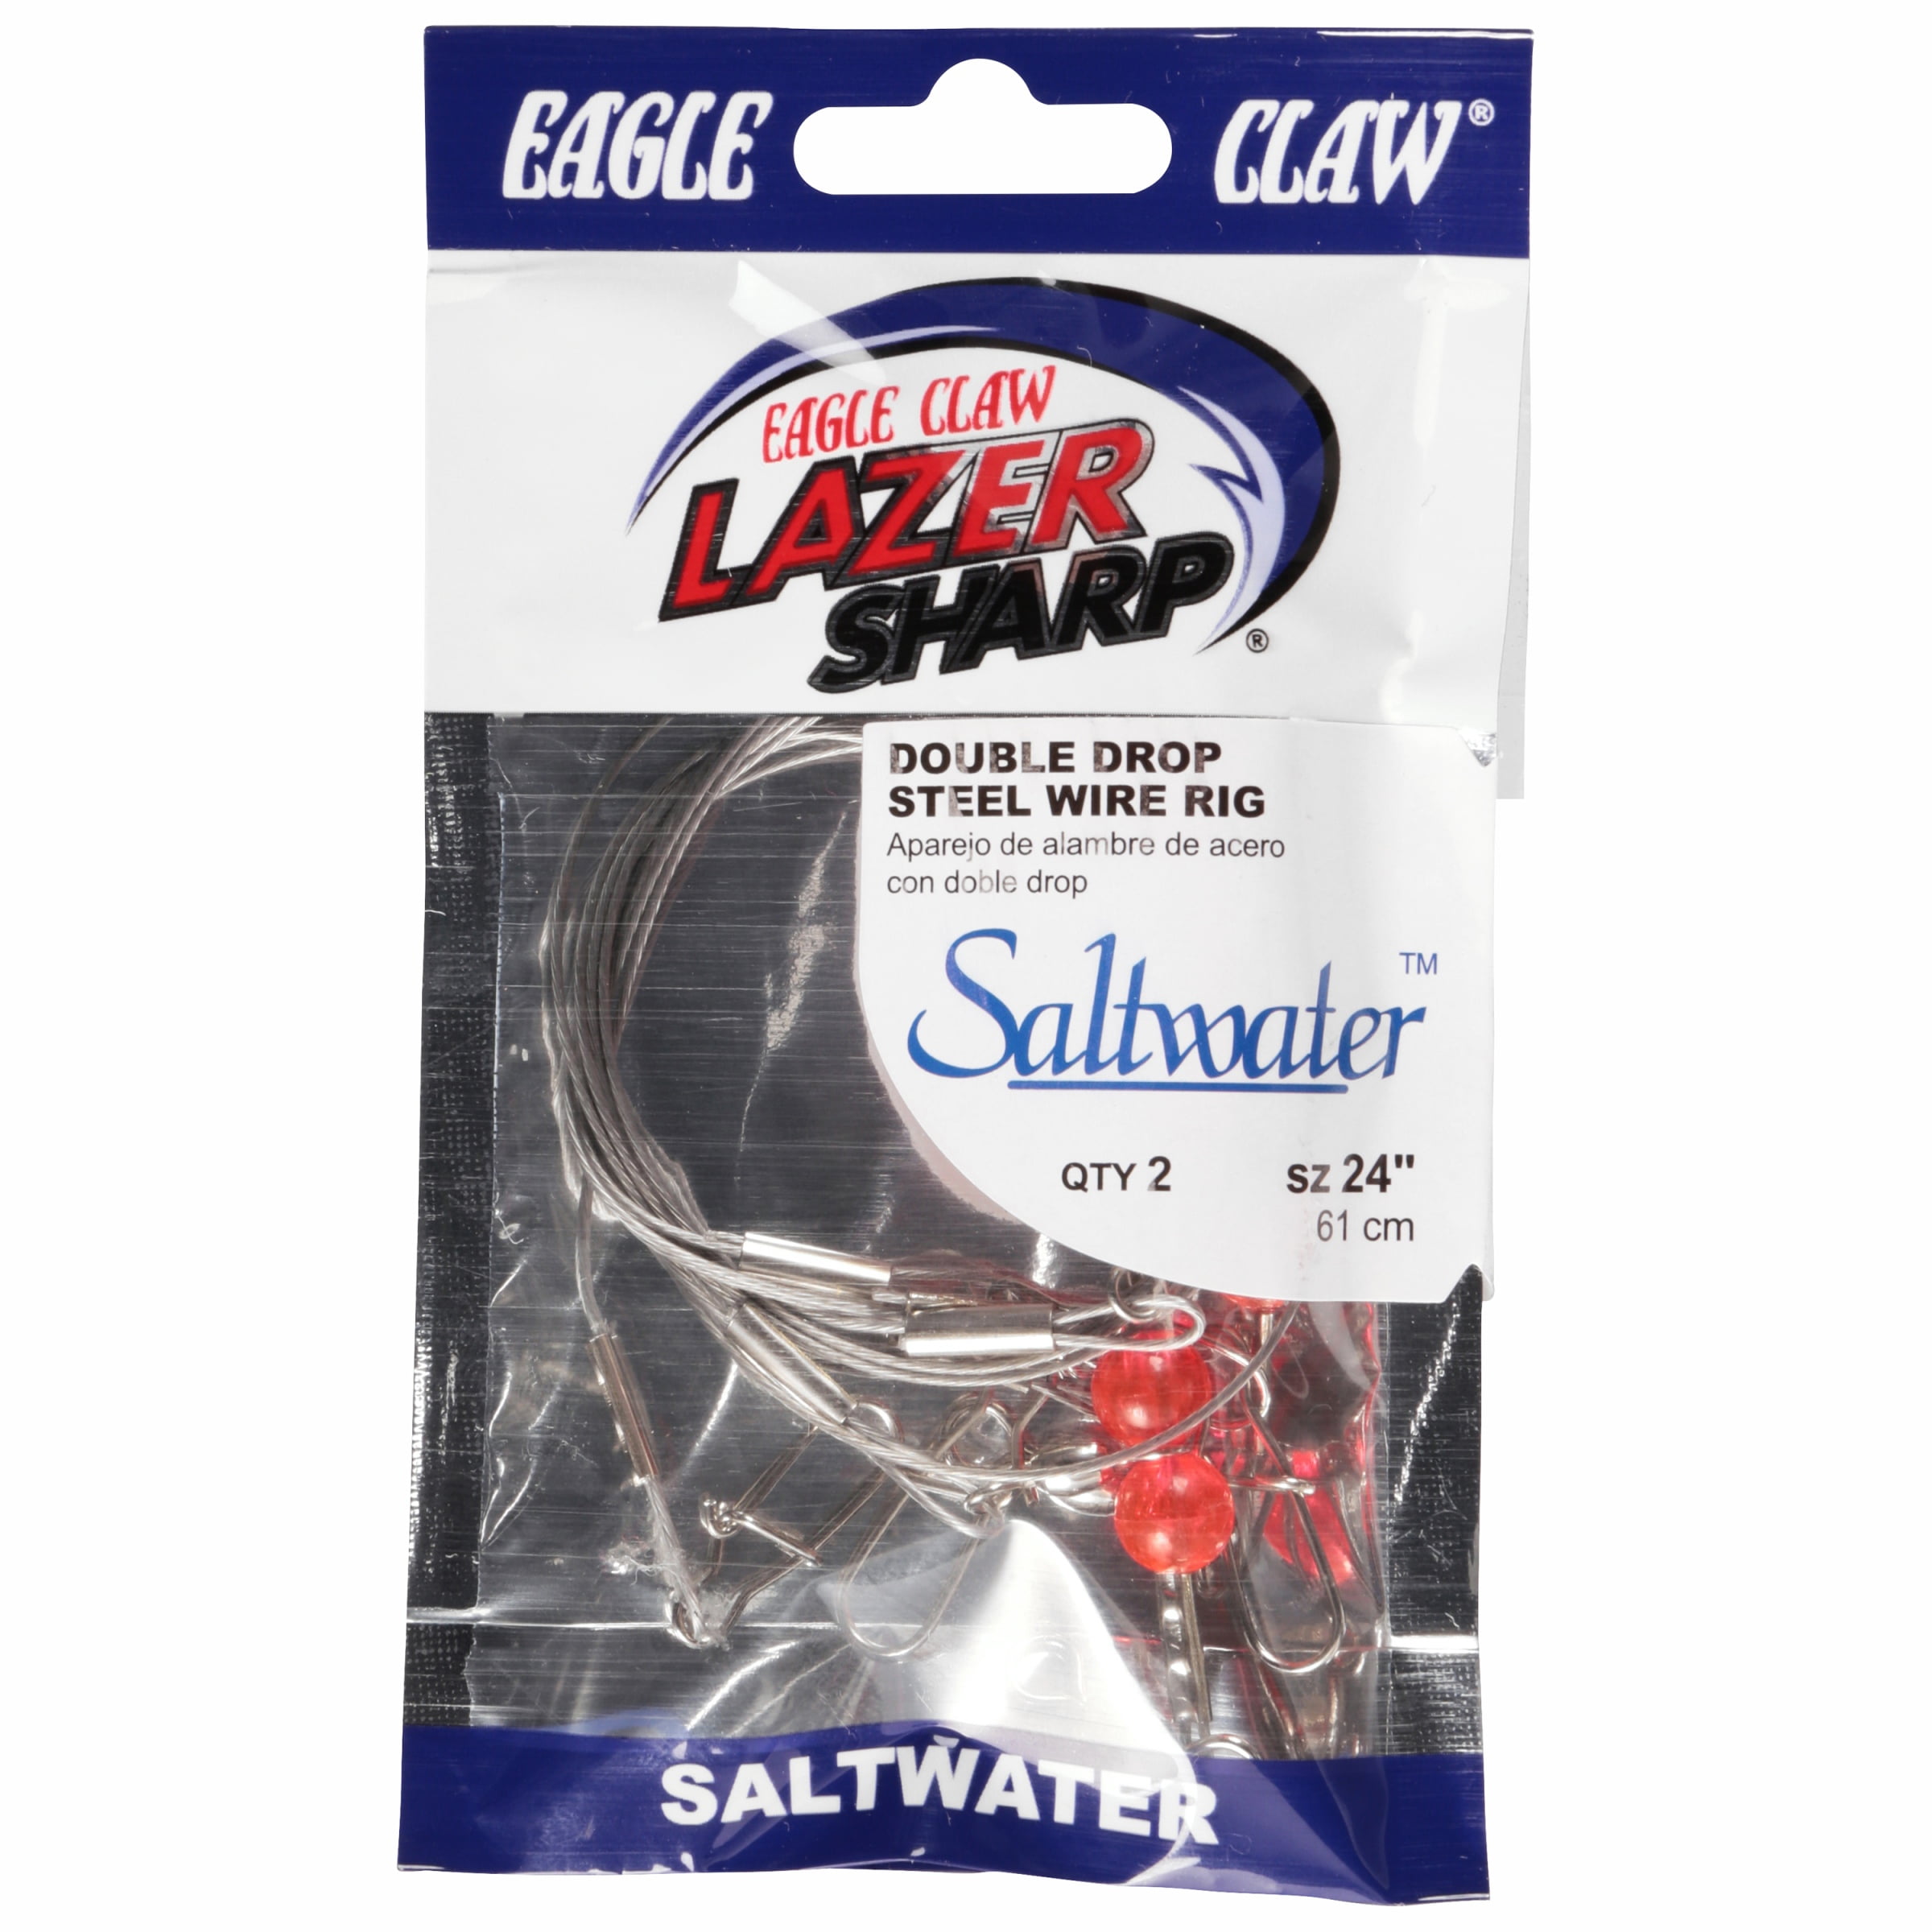 Eagle Claw Fishing,Lazer Sharp Saltwater Double Drop Steel Wire Rig 